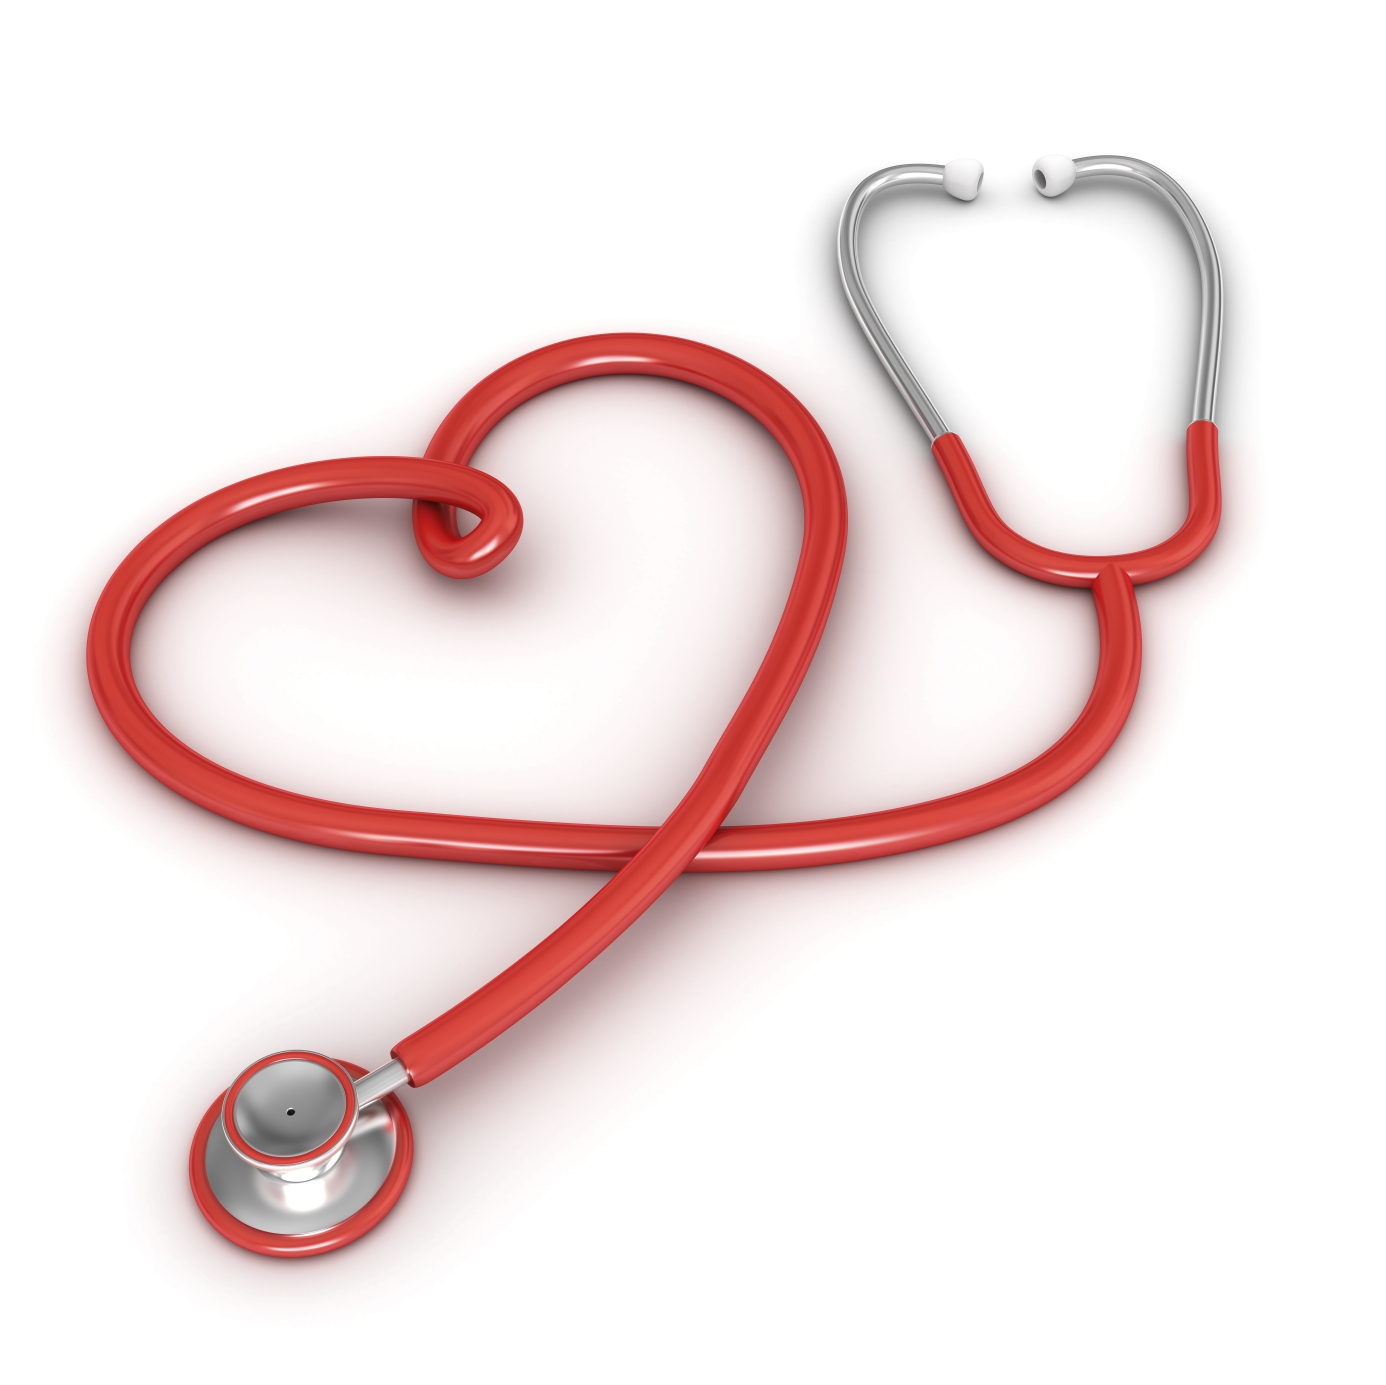 Stethoscope Pictures - ClipArt Best